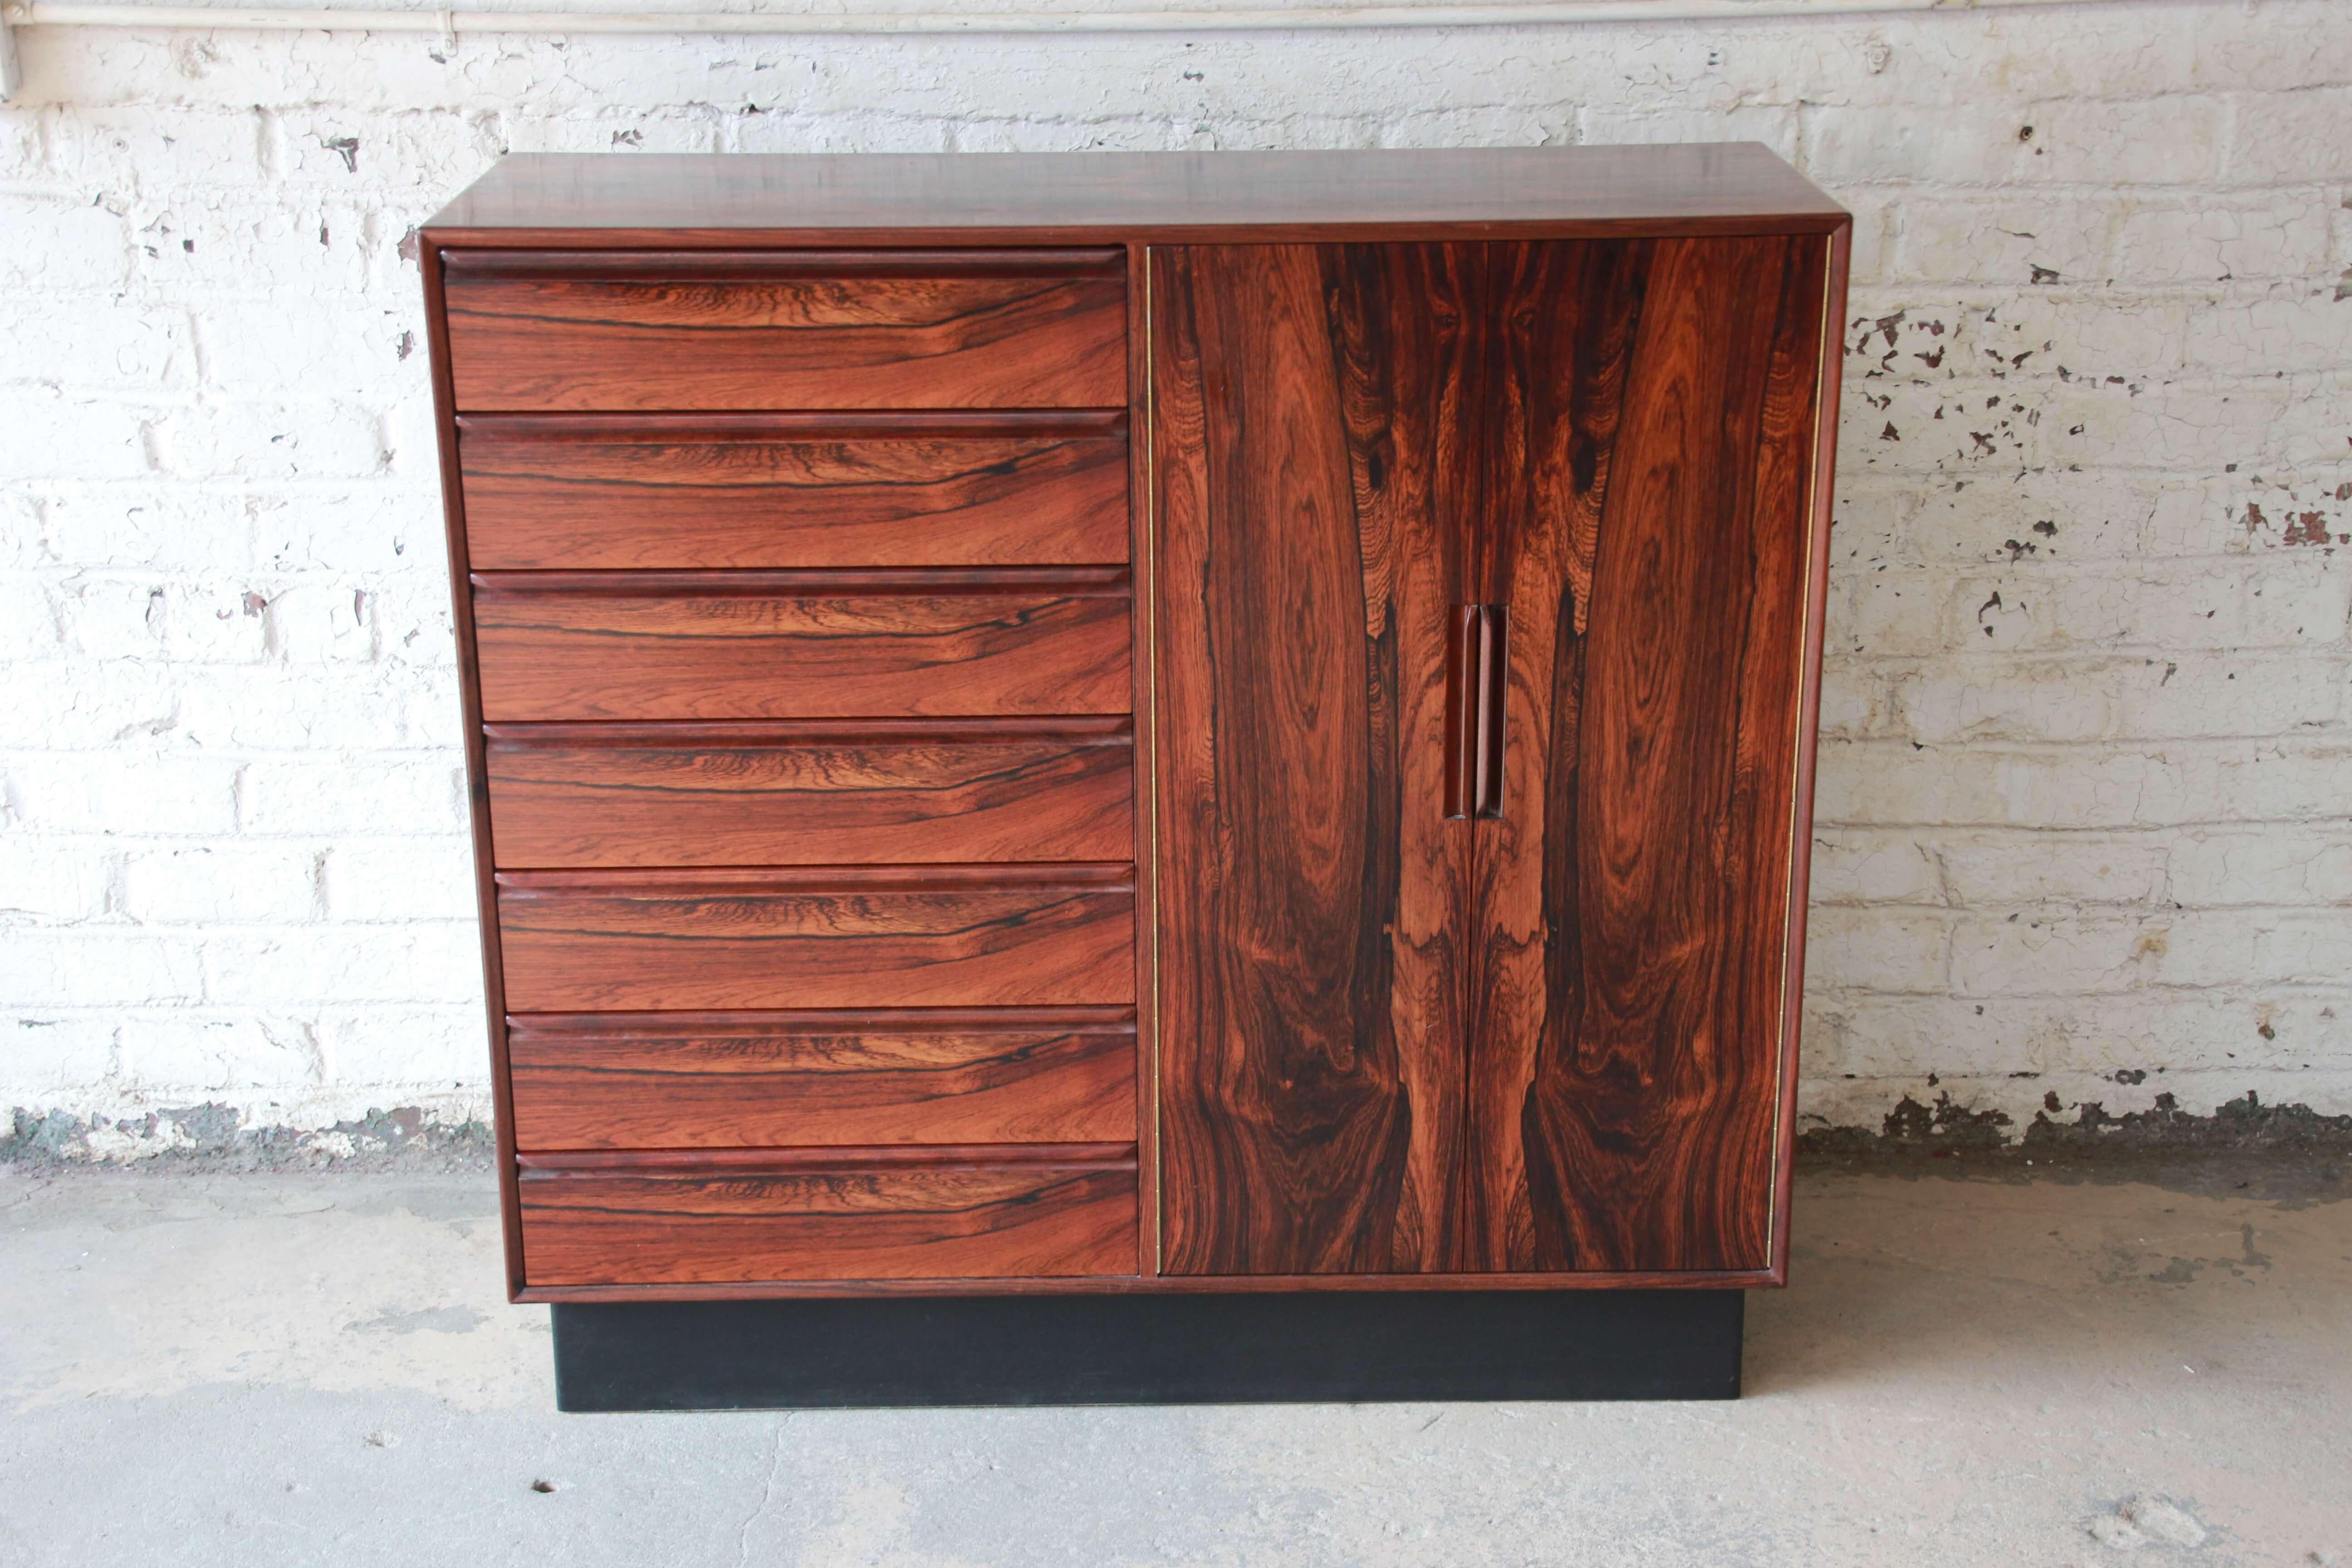 Offering a stunning Norwegian rosewood gentlemen's chest or dresser by Westnofa. This statement piece has a rich and vibrant wood grain throughout the entire piece. The two cabinet doors on the right open up to reveal seven graduated drawers for